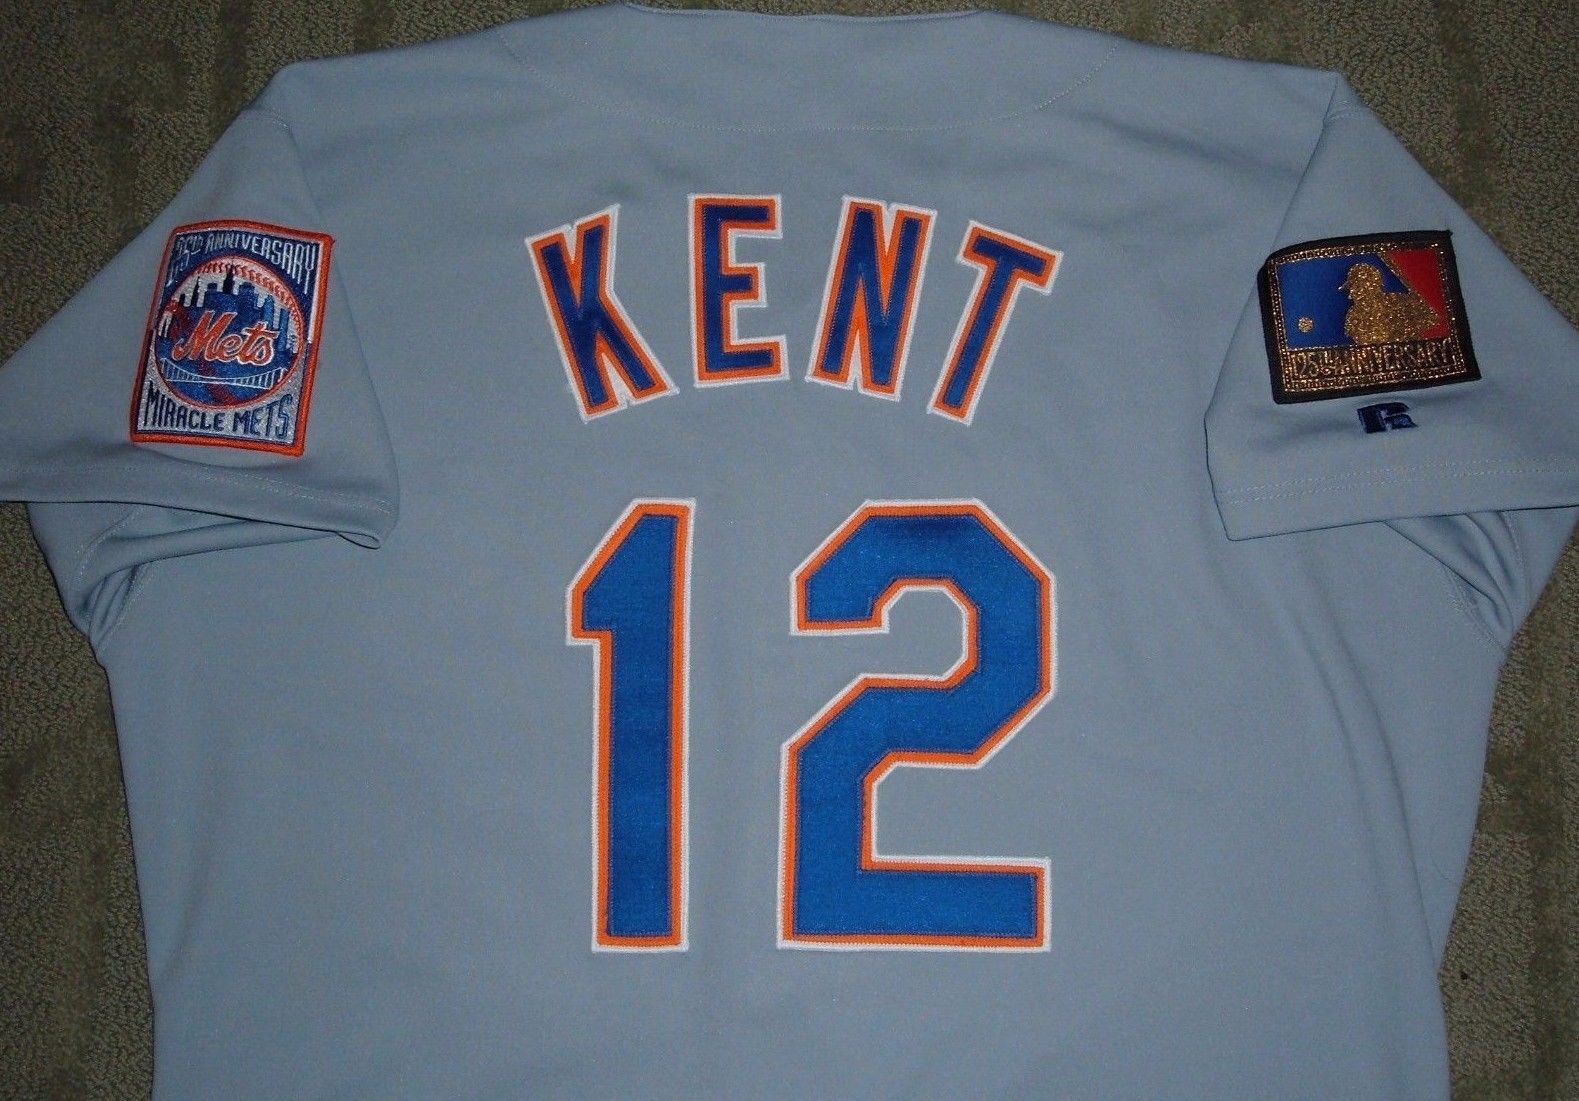  Game Used: 1991 Kevin Elster Jersey